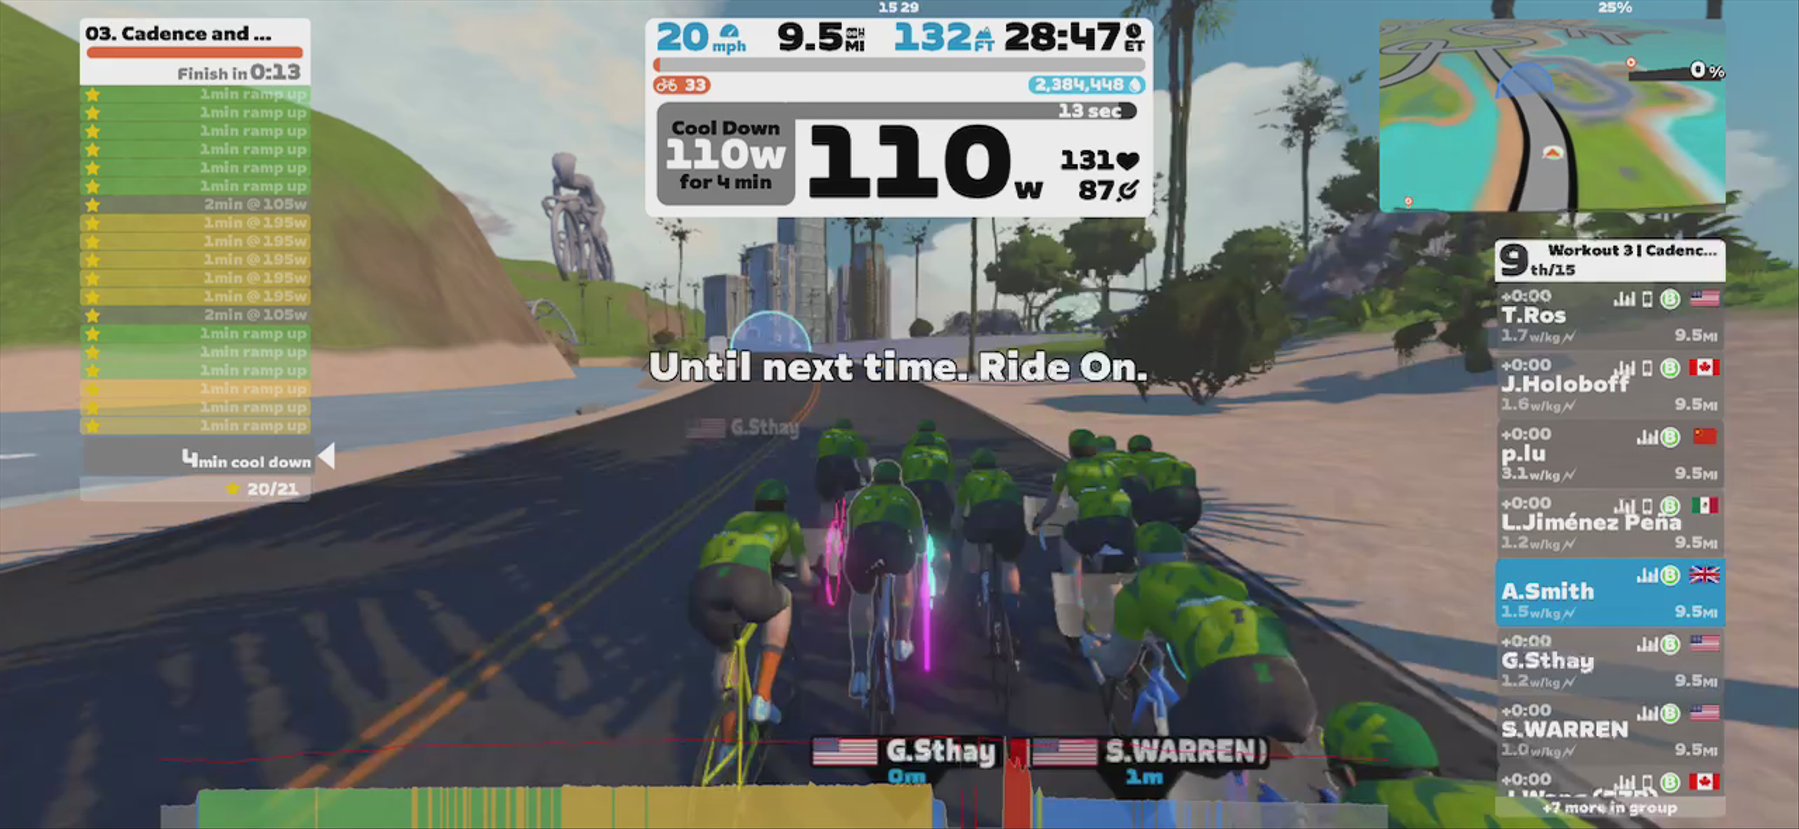 Zwift - Group Workout: Short - Cadence and Cruise  on Big Flat 8 in Watopia